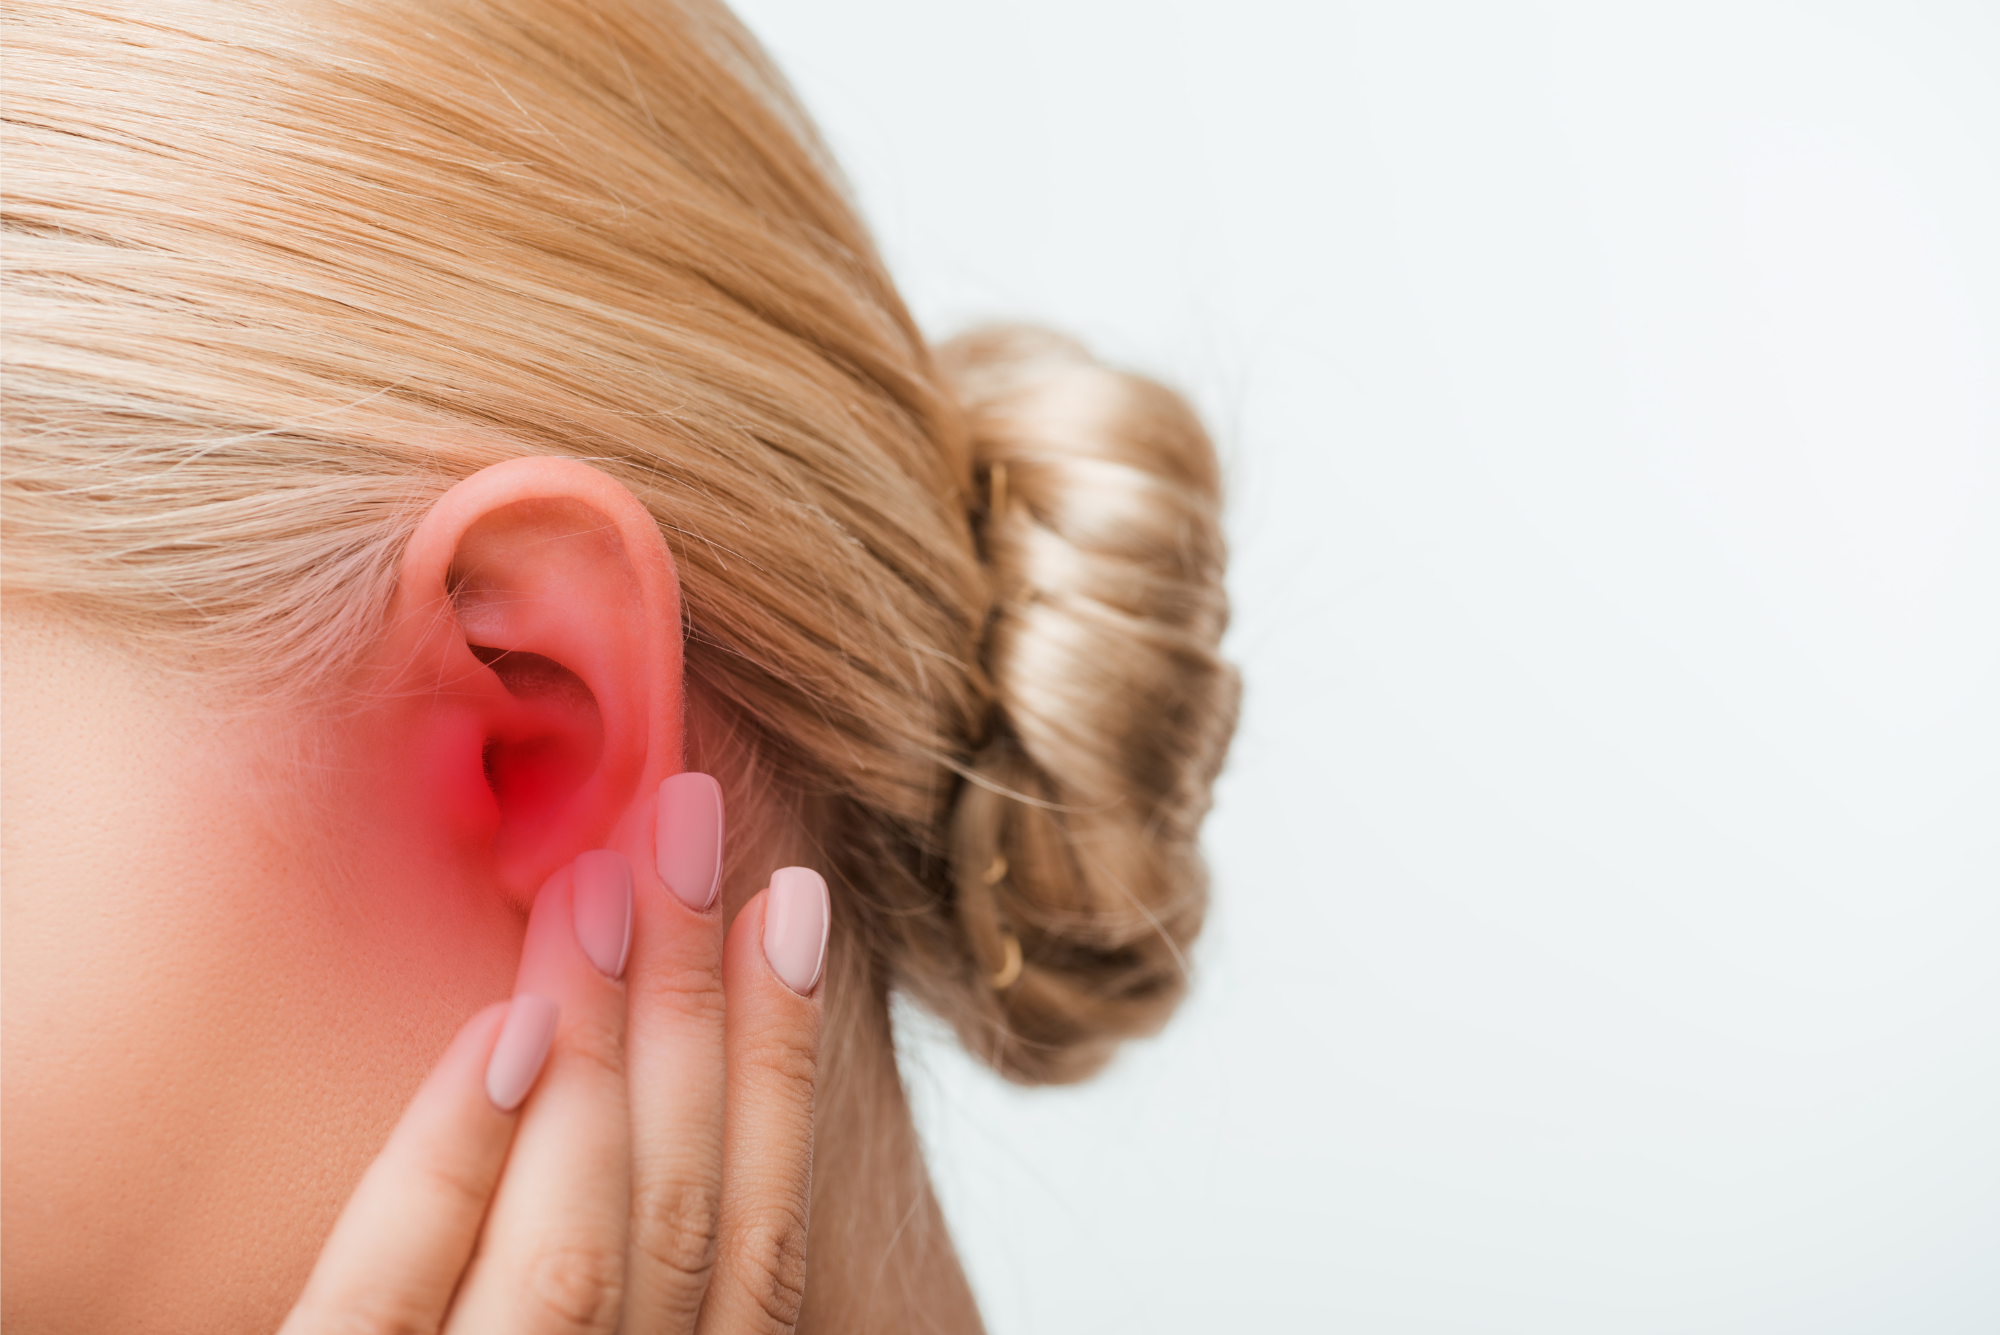 A woman holds her painful ear, wondering when she should see her doctor.